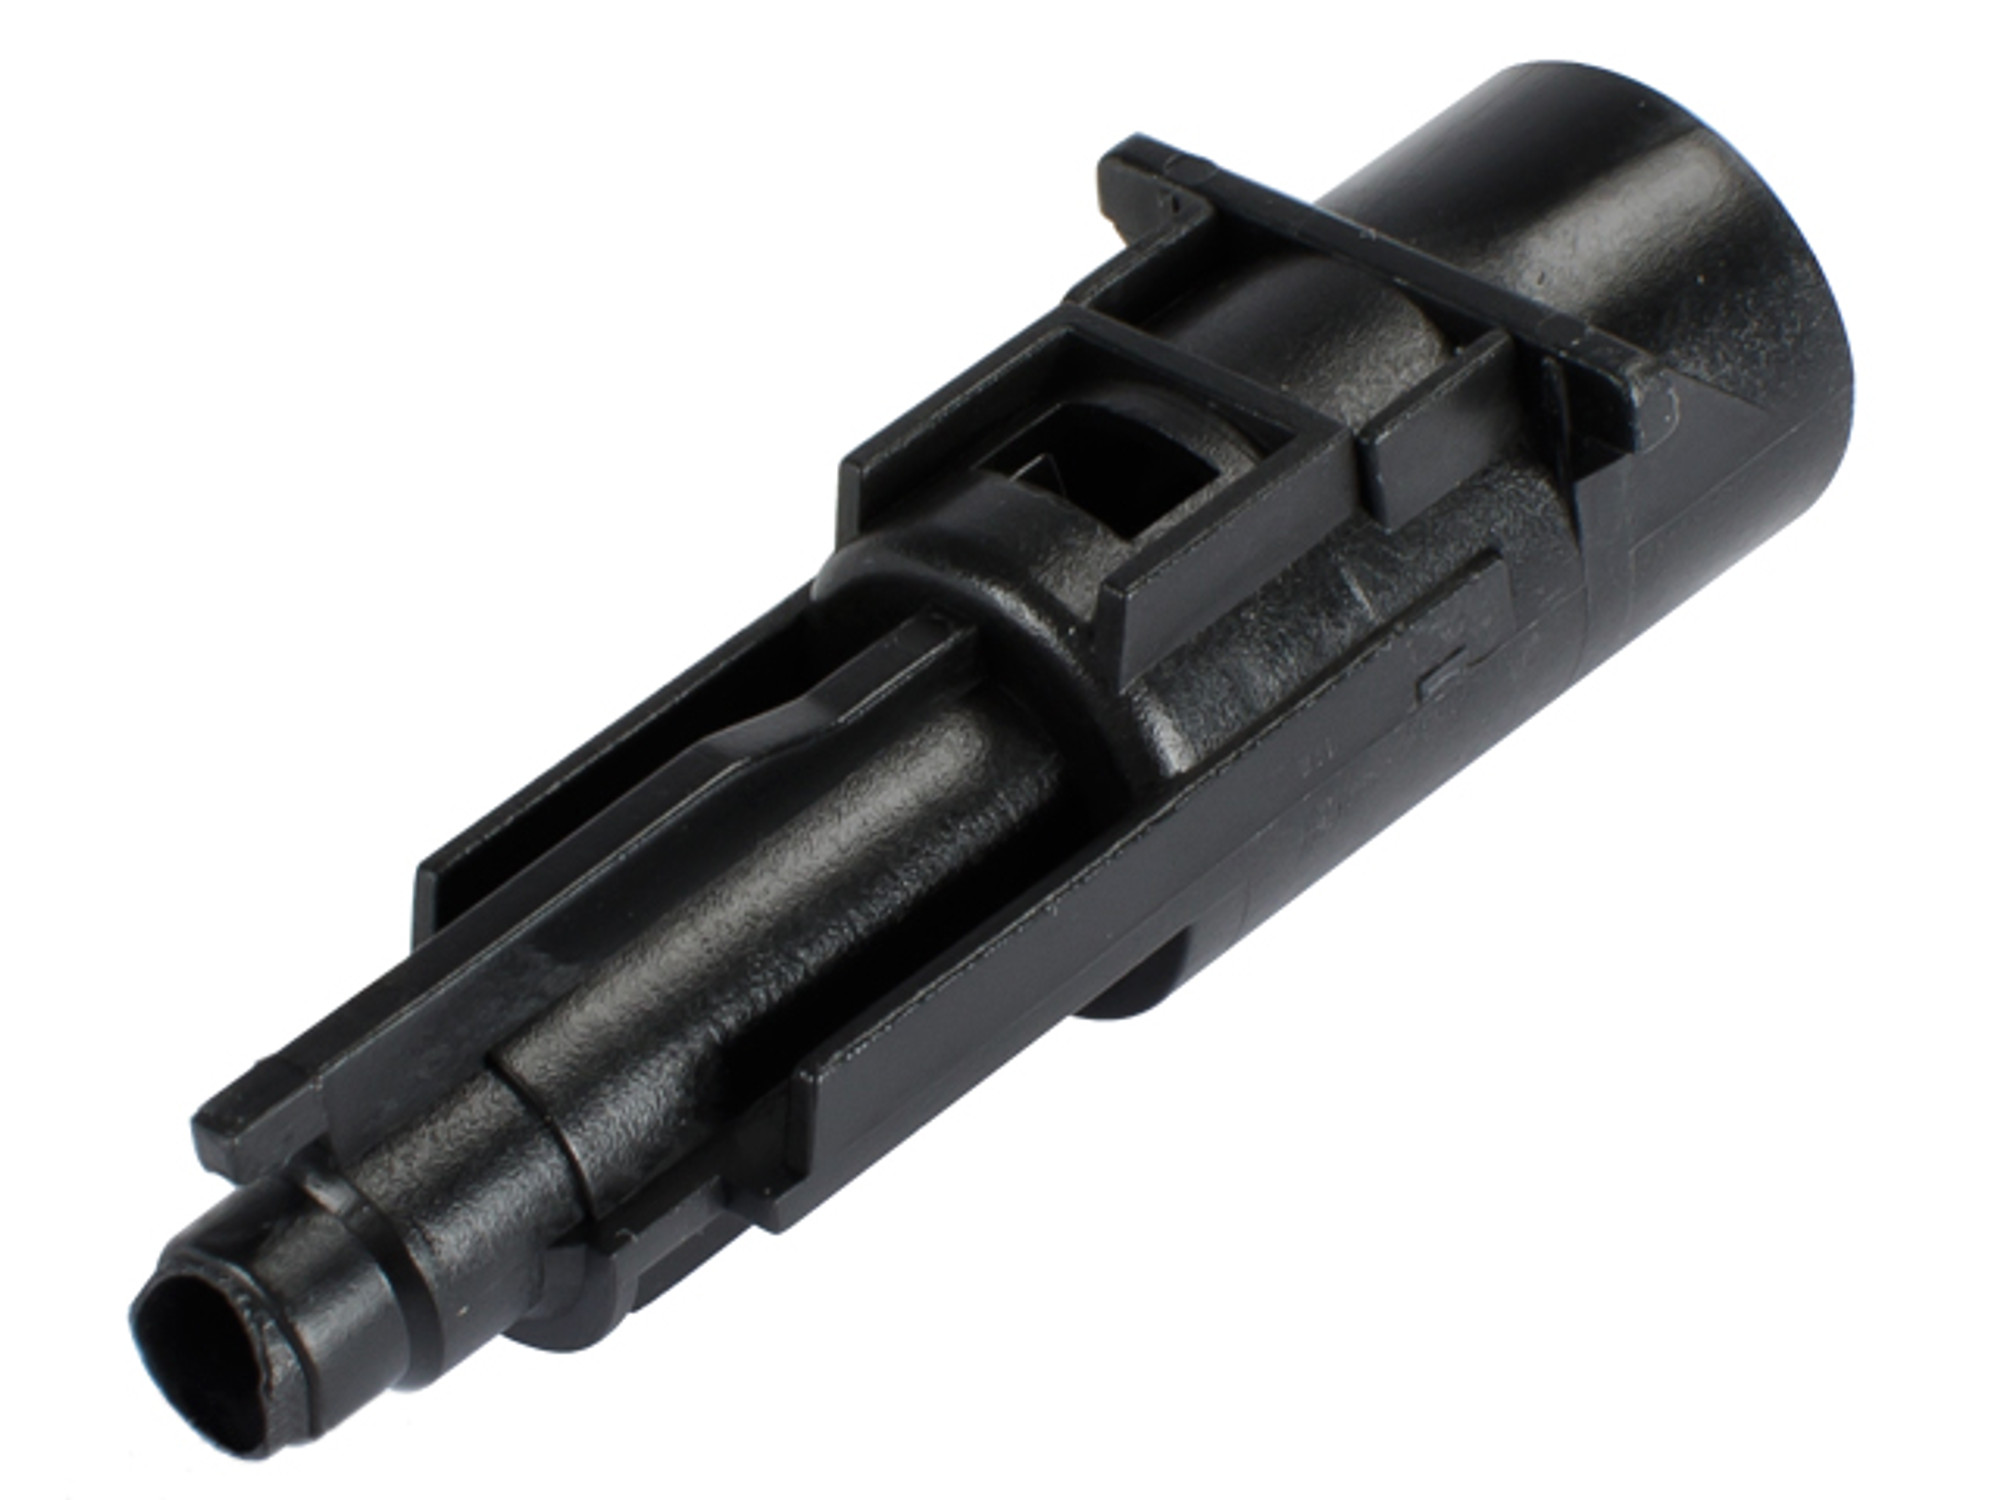 Reinforced Nozzle for WE HFC KJW Tokyo Marui & Comp. M9 Series Airsoft Gas Blowback GBB